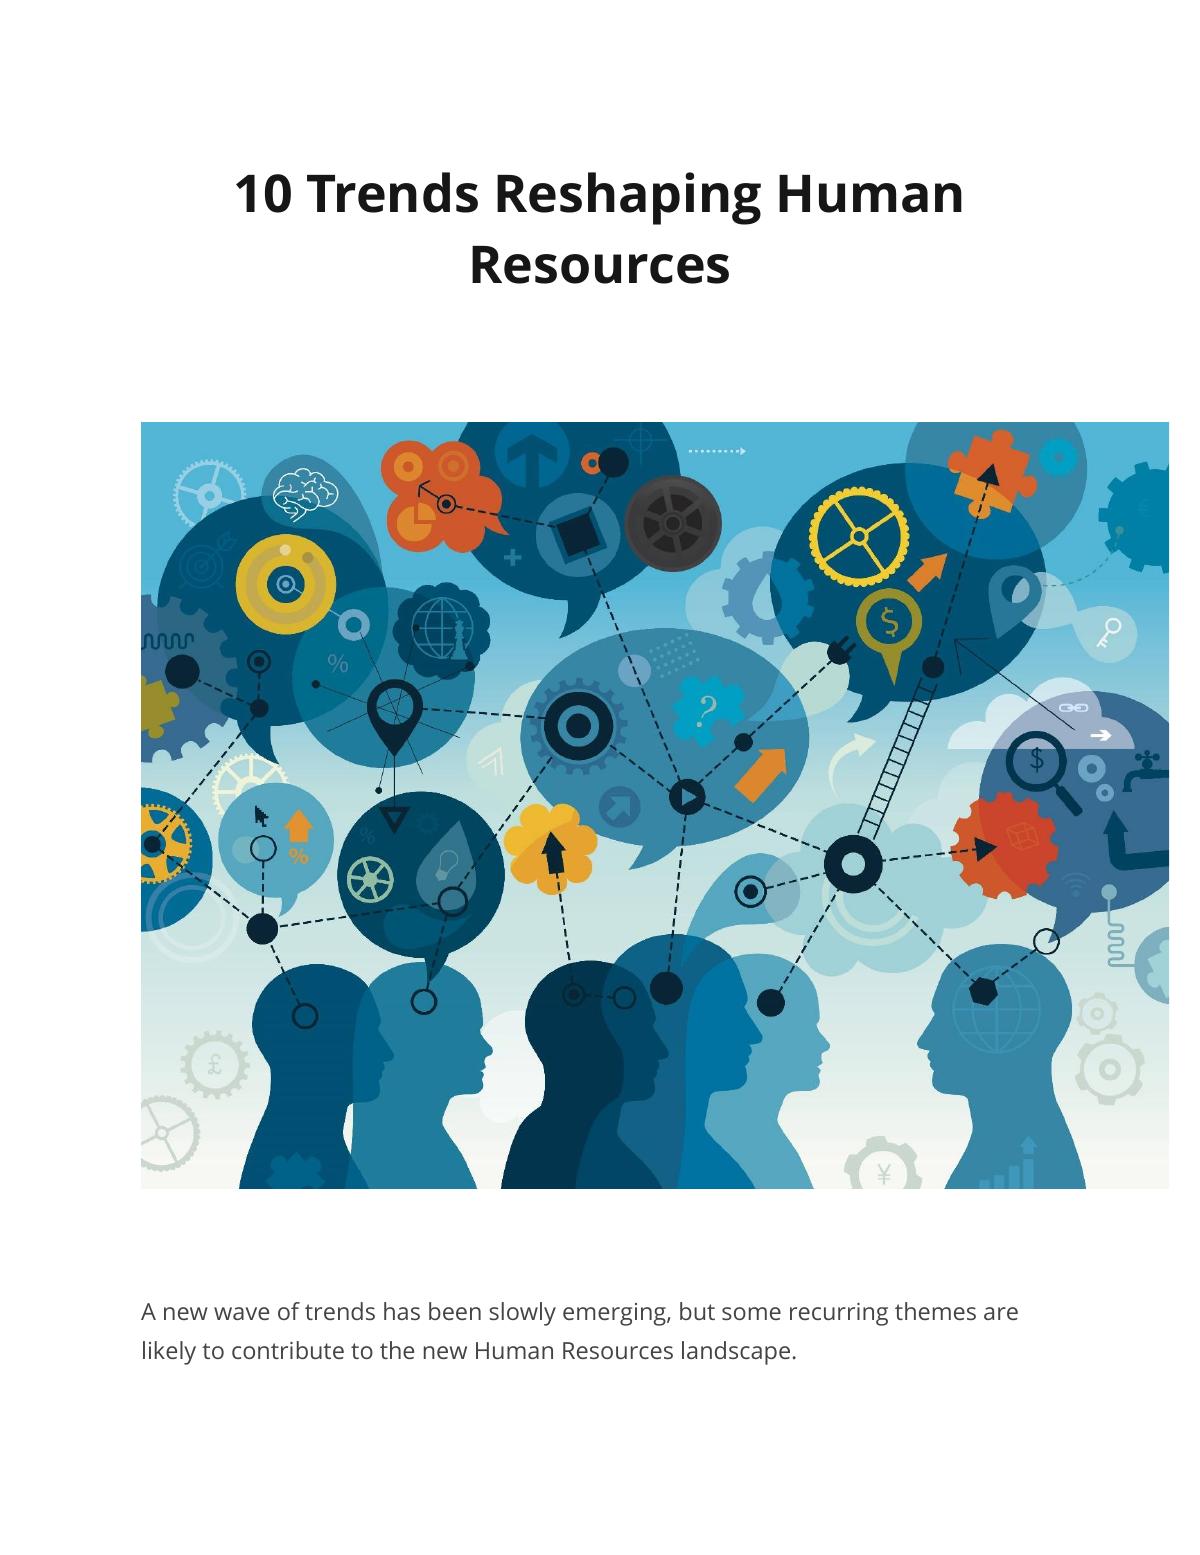 10 Trends Reshaping Human Resources 